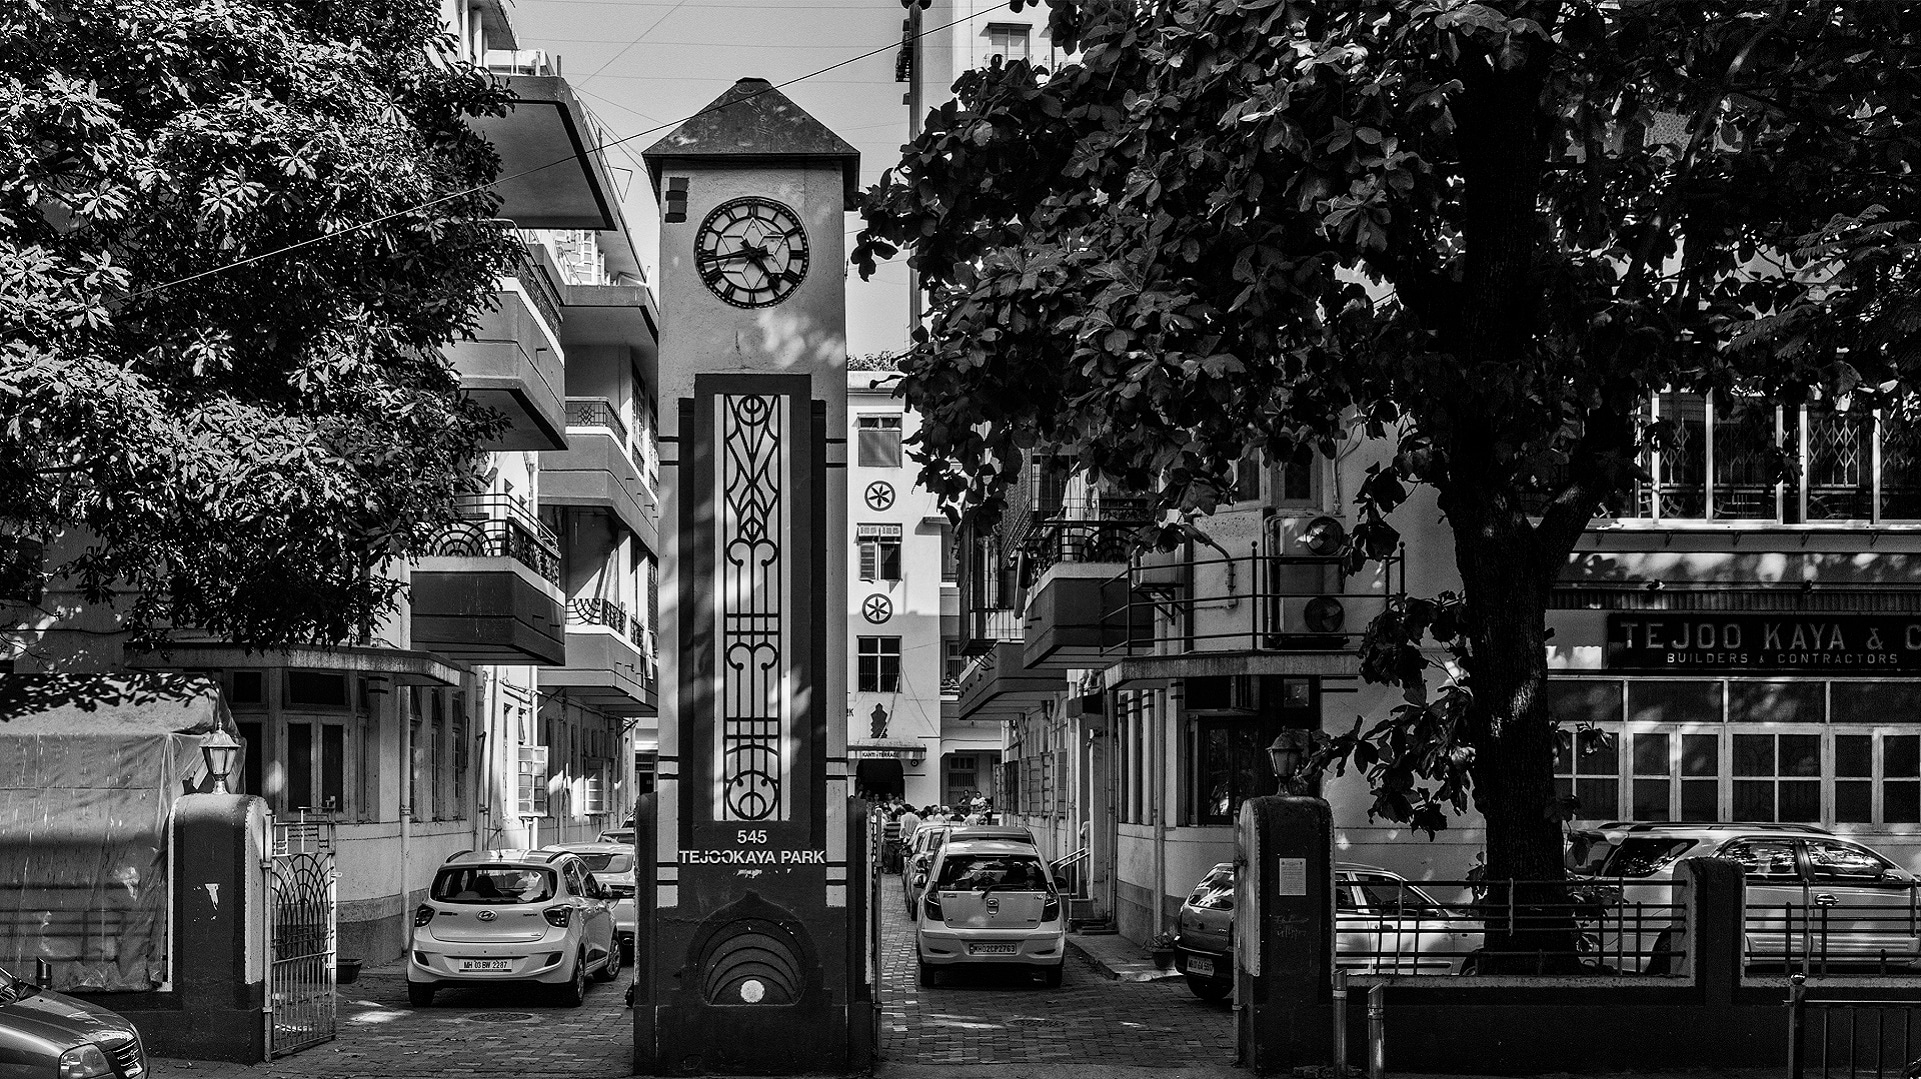 Public clocks of Bombay: In documenting the city's timekeepers, musings on the nature of time 